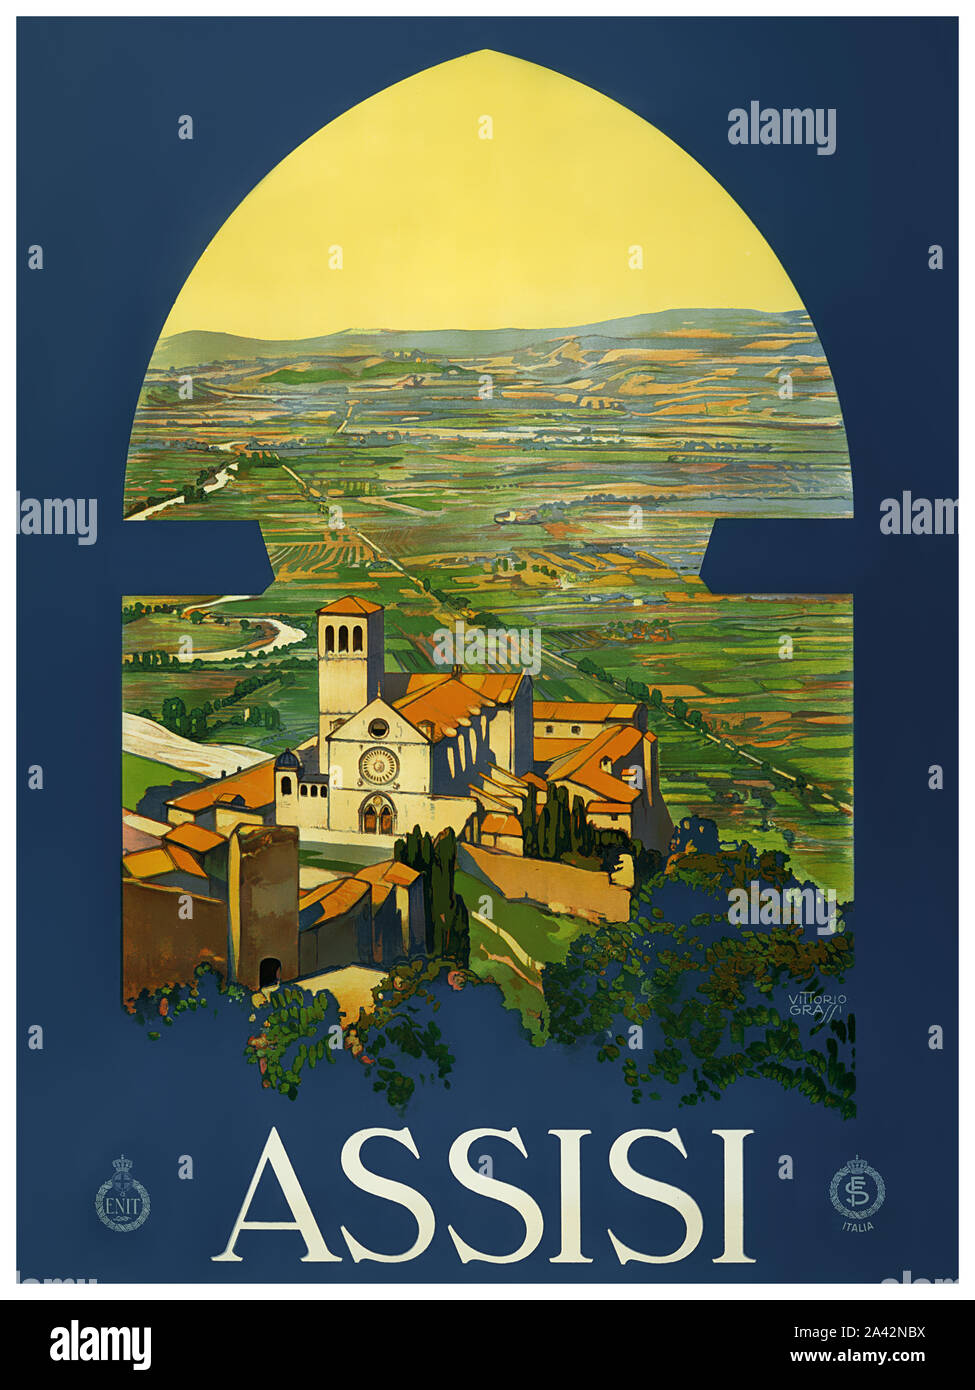 Assisi Travel Poster Stock Photo